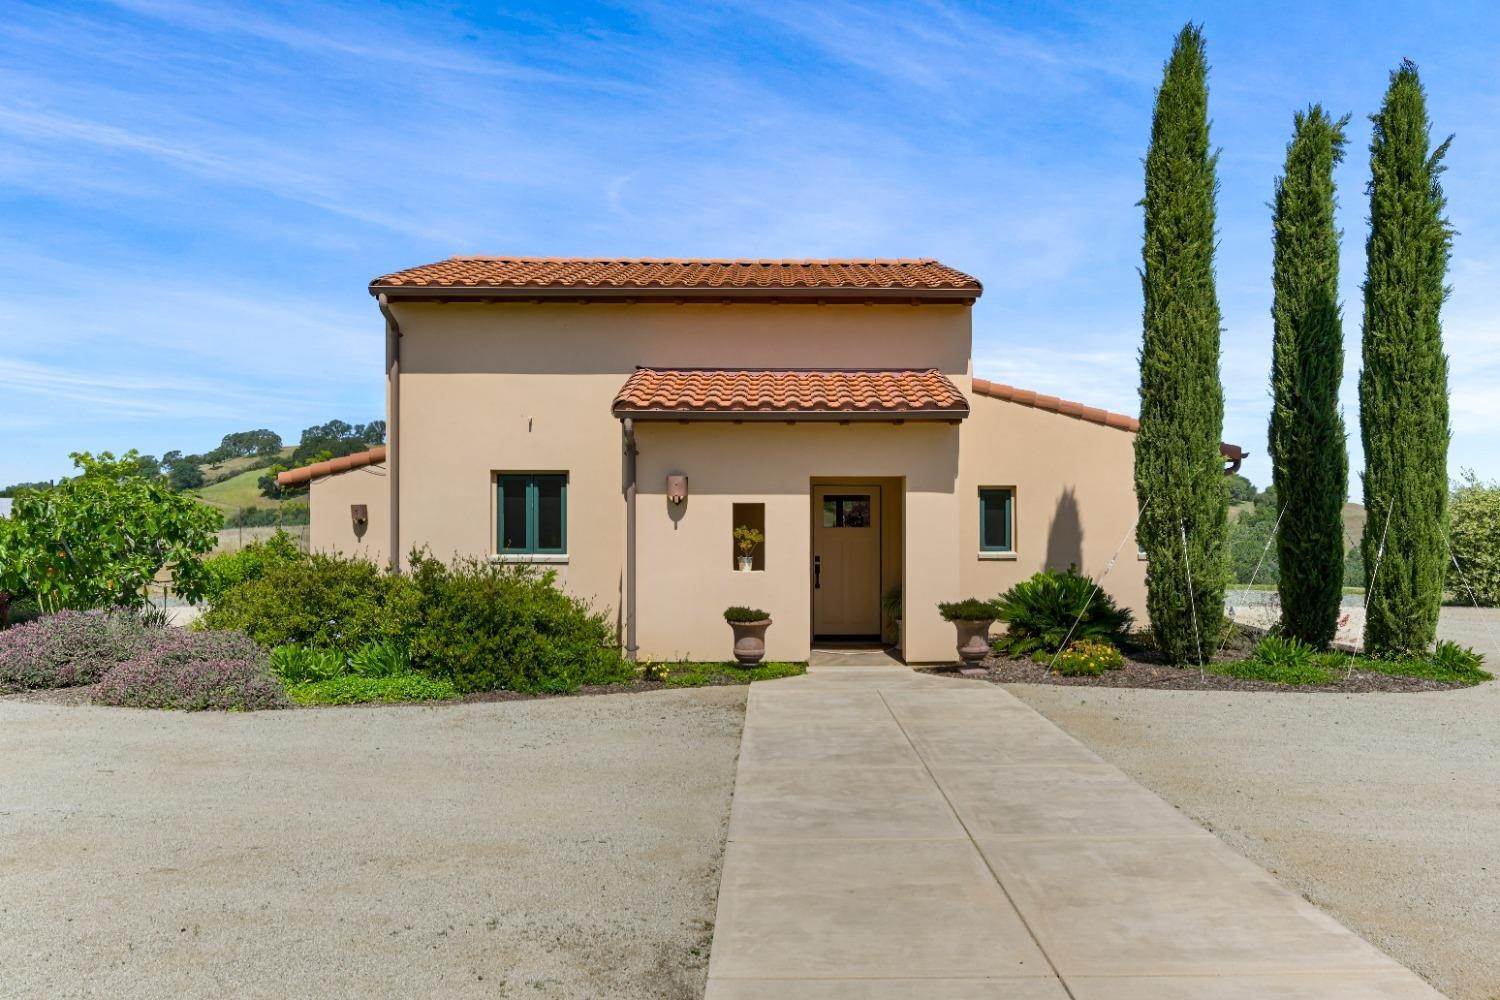 46. Single Family Homes for Active at 11011 Vintage Road Ione, California 95640 United States